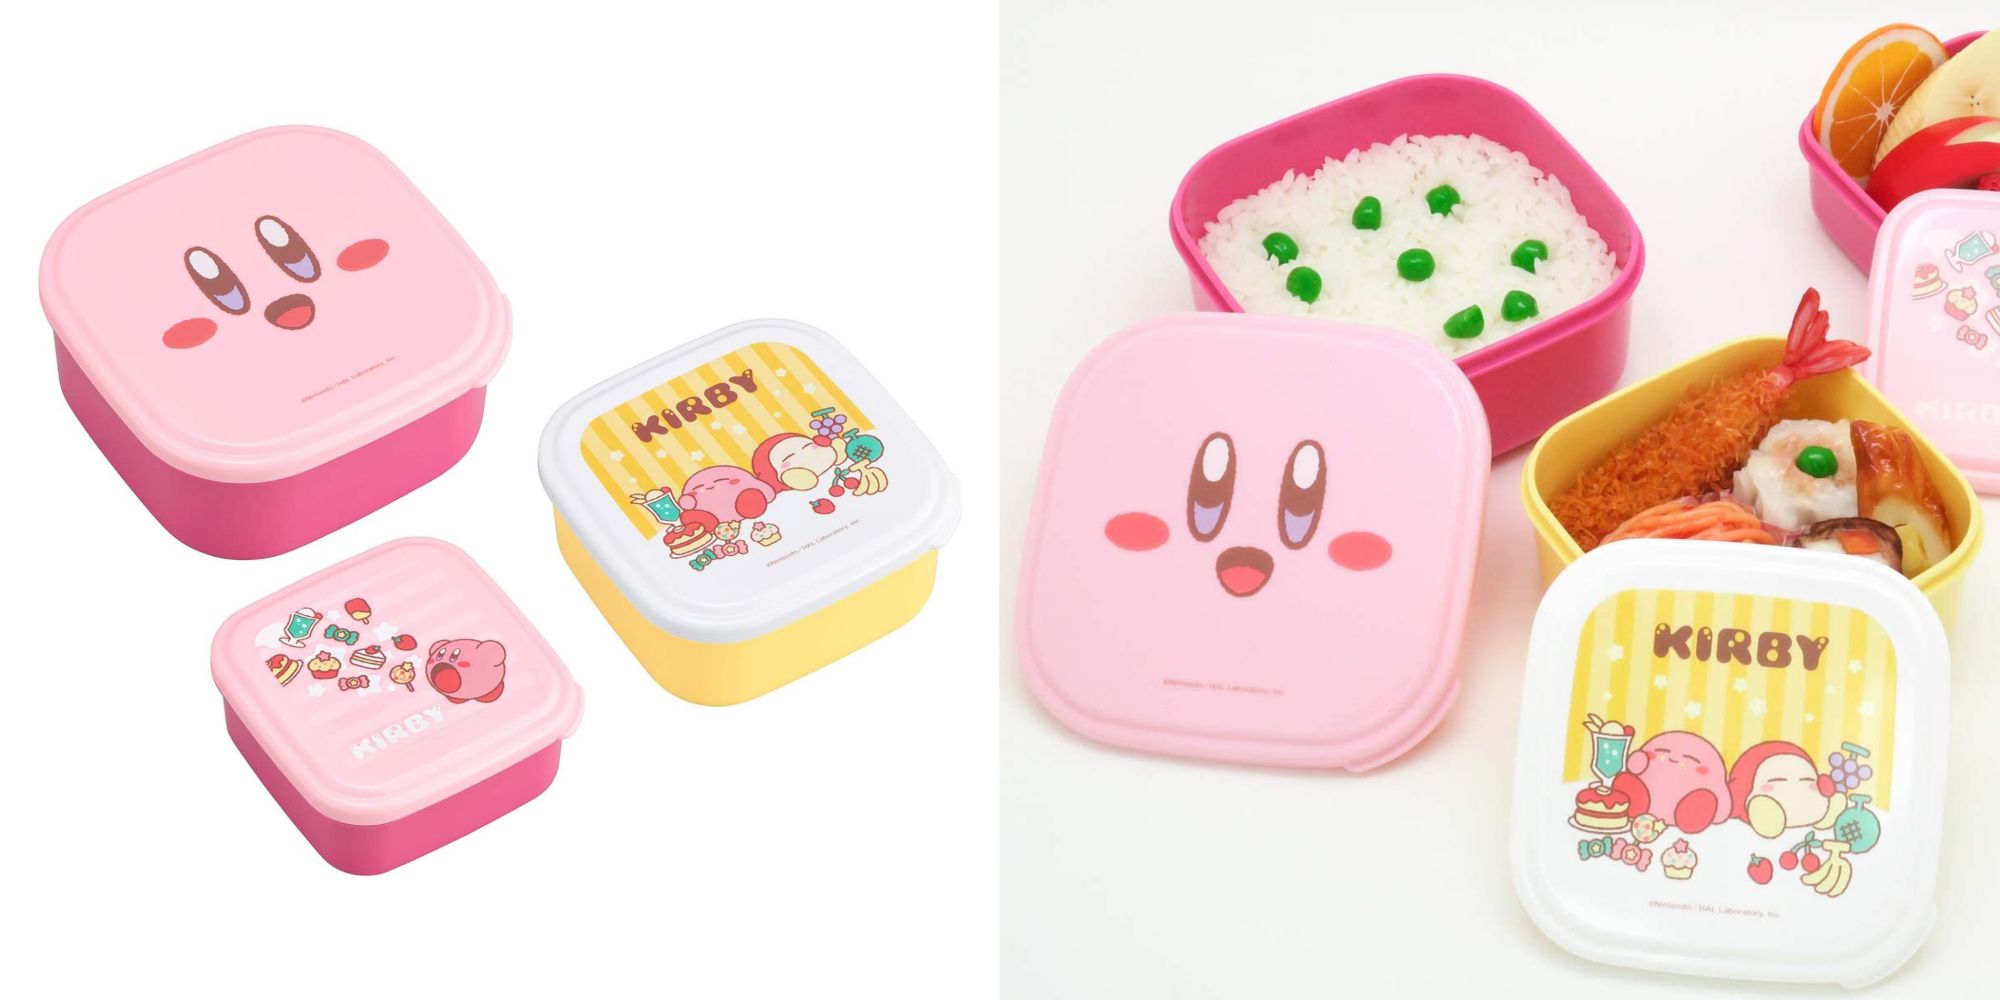 Kirby's lunchbox closed and filled with food